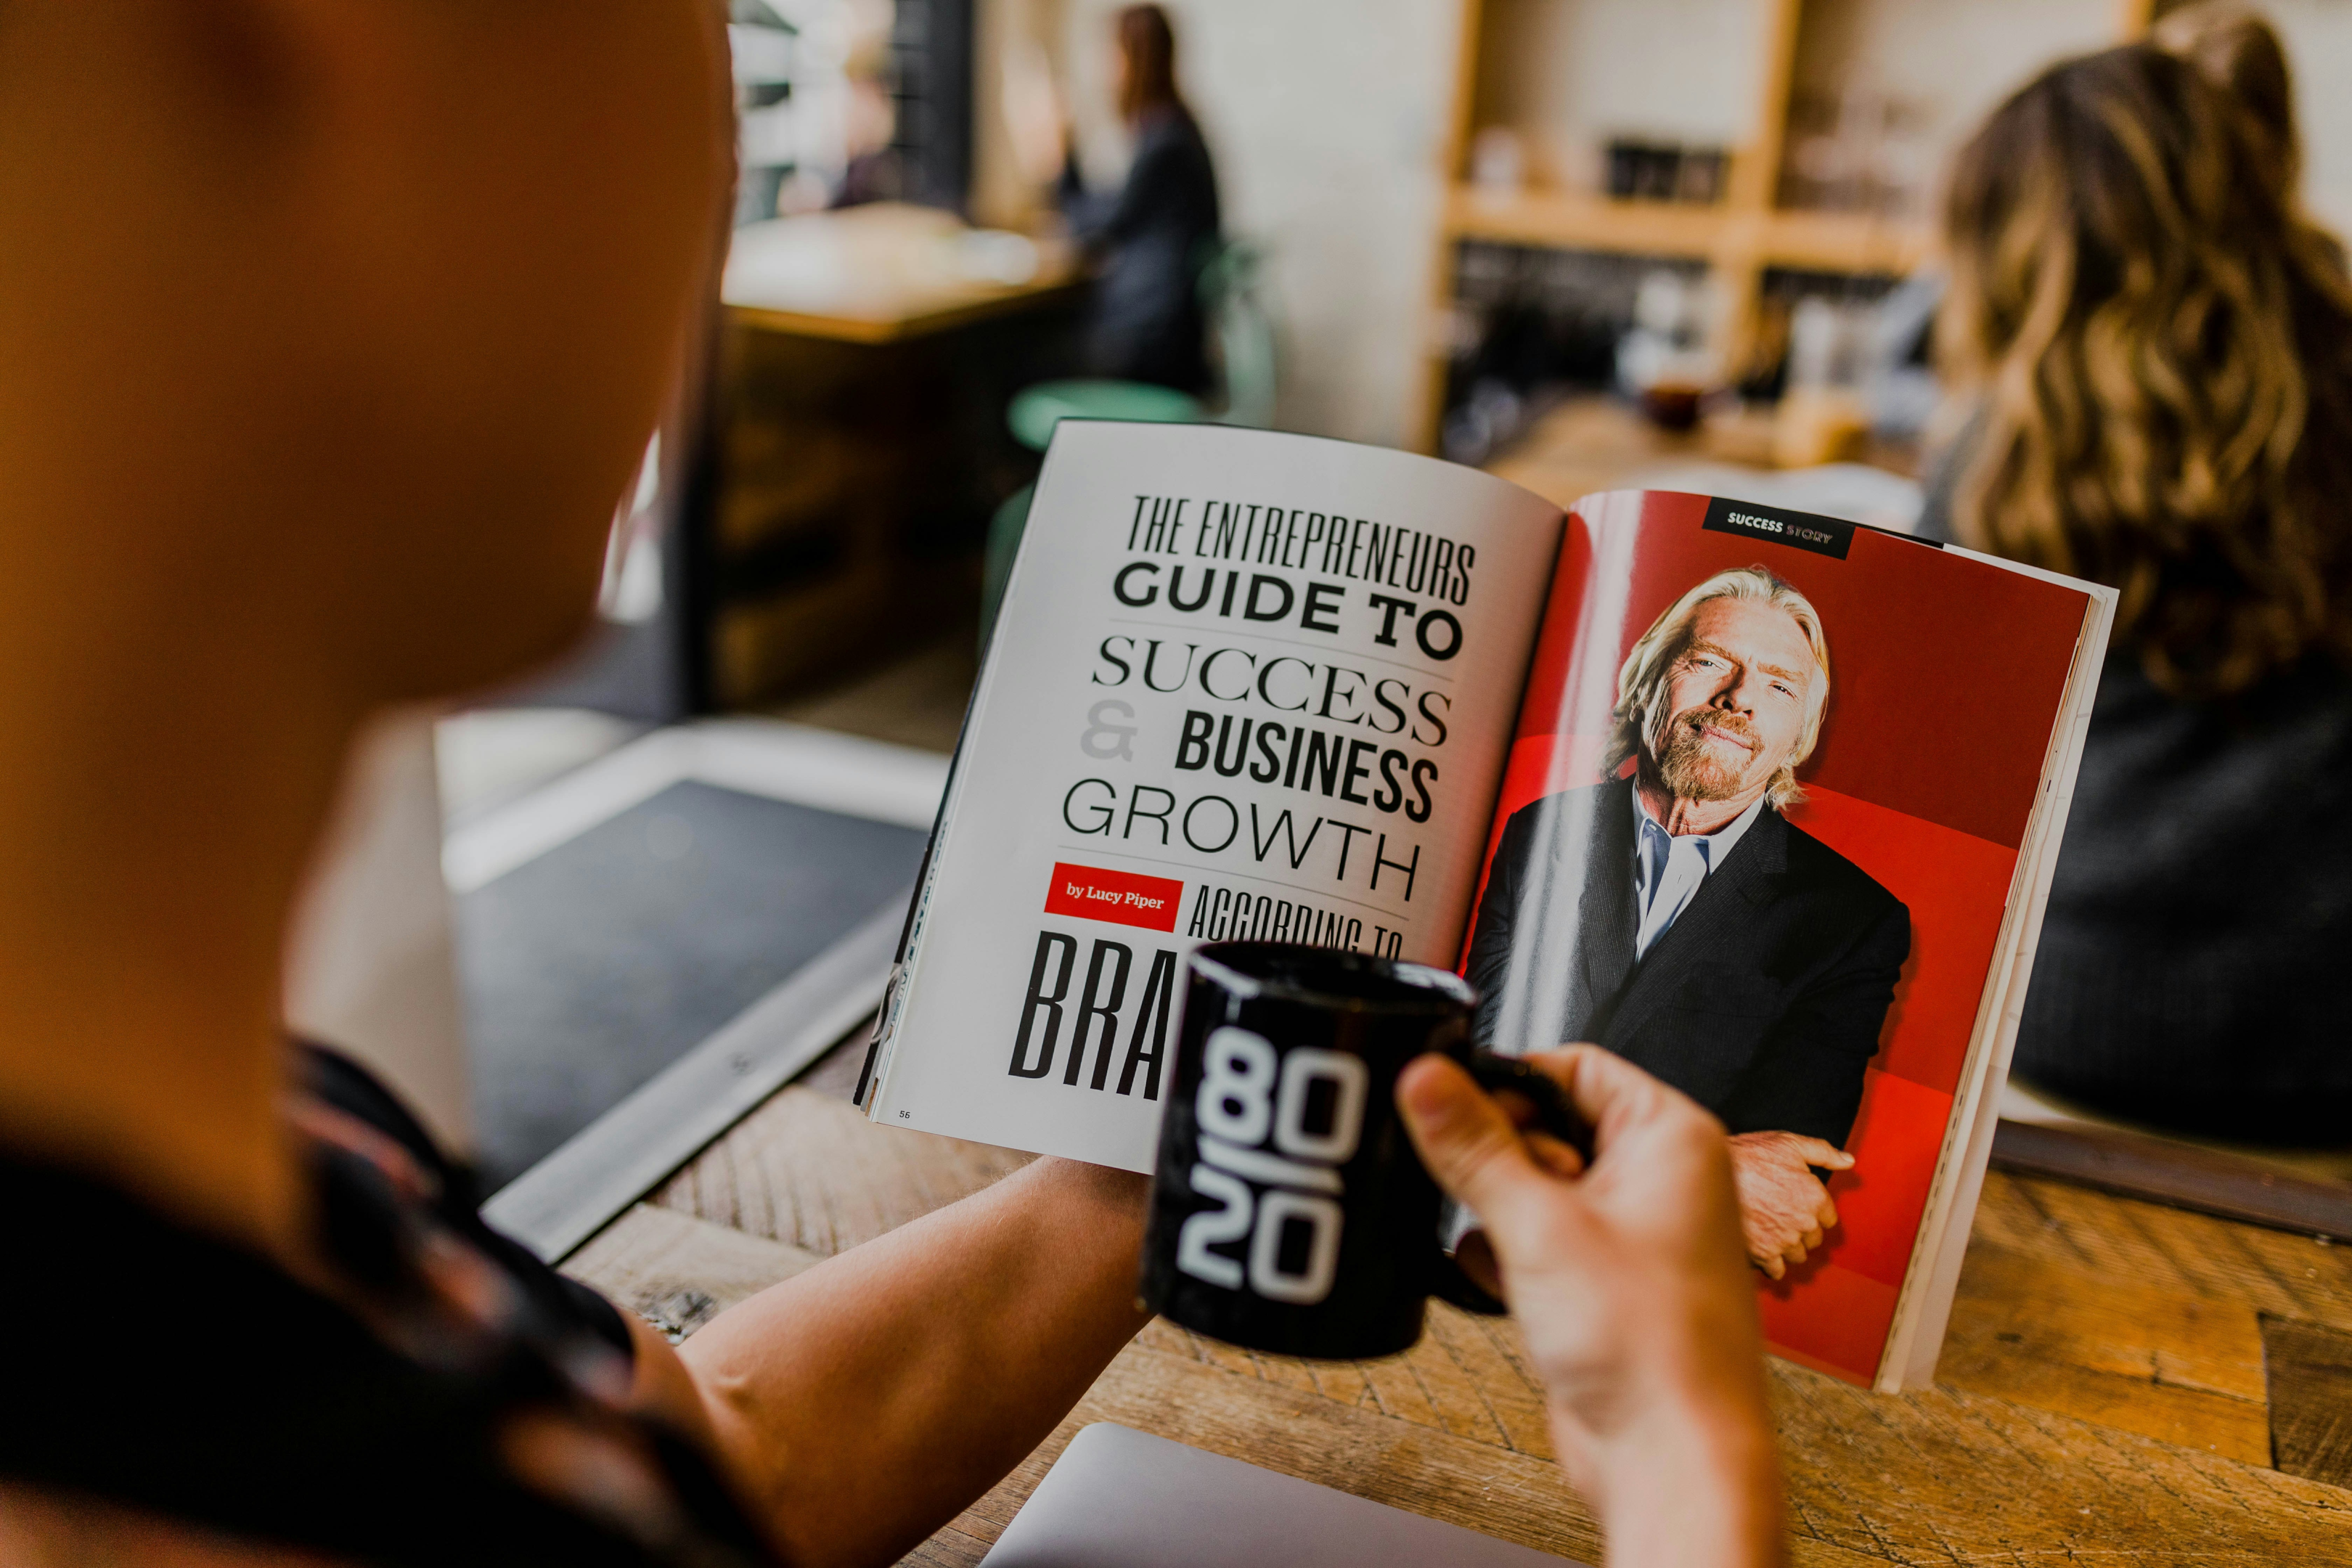 Man holding a coffee mug with 80/20 written on it reading an entrepreneurs guide to success